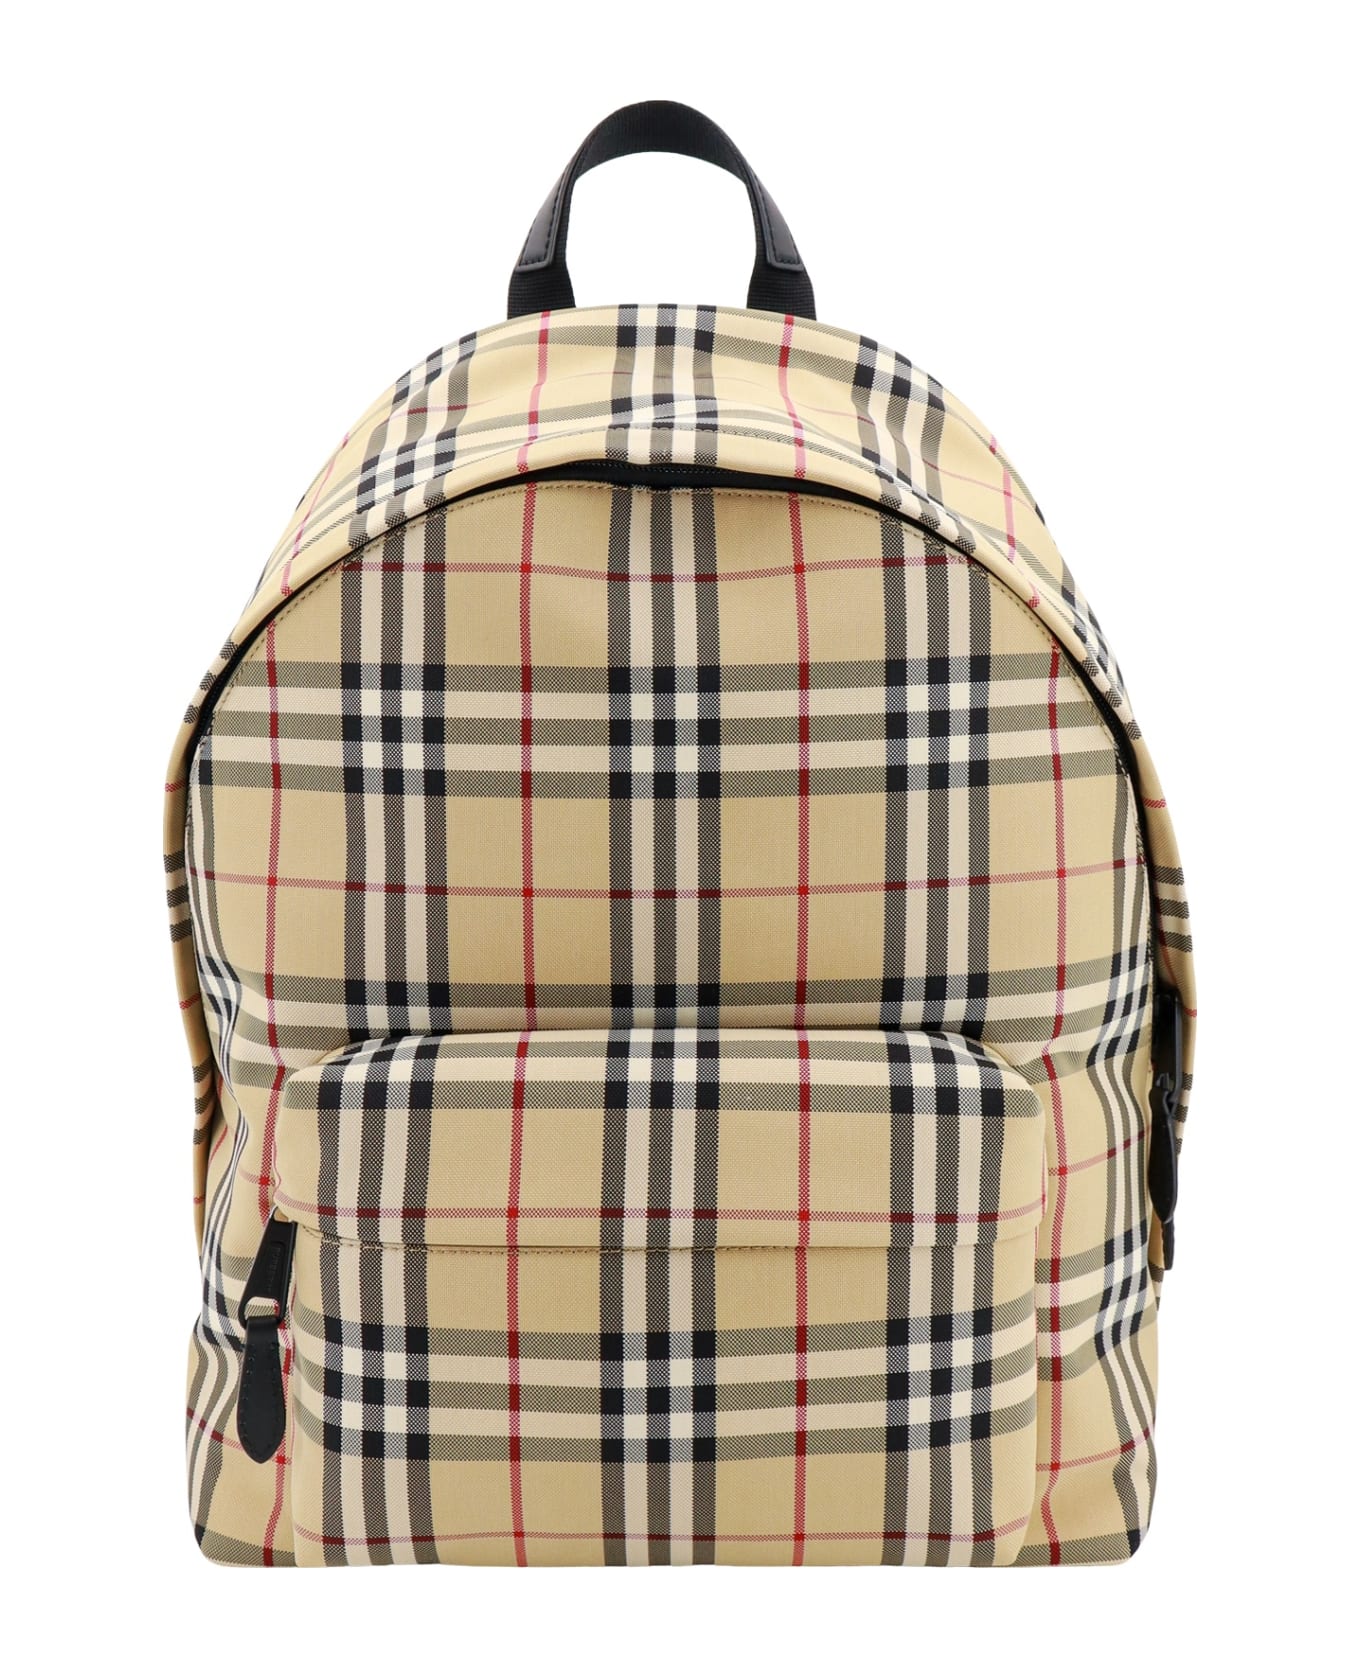 Burberry Backpack - Archive Beige